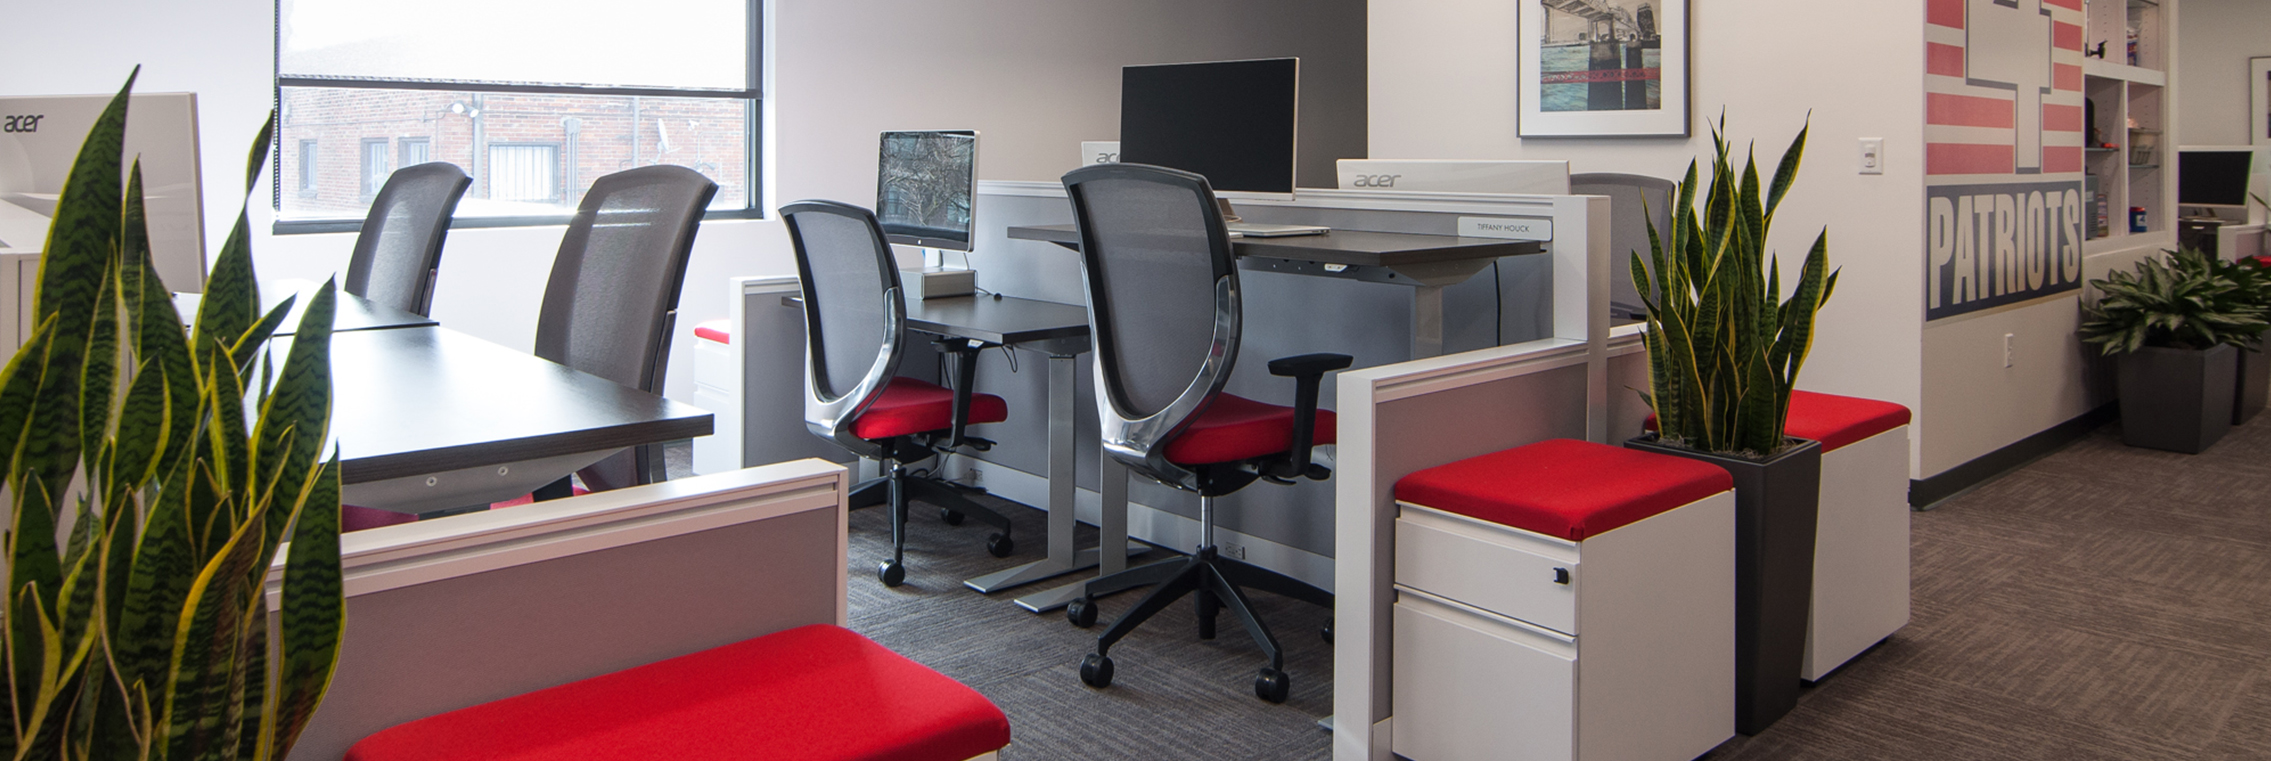 Header Image: Commercial Office Furniture & Space Planning in Nashville, TN